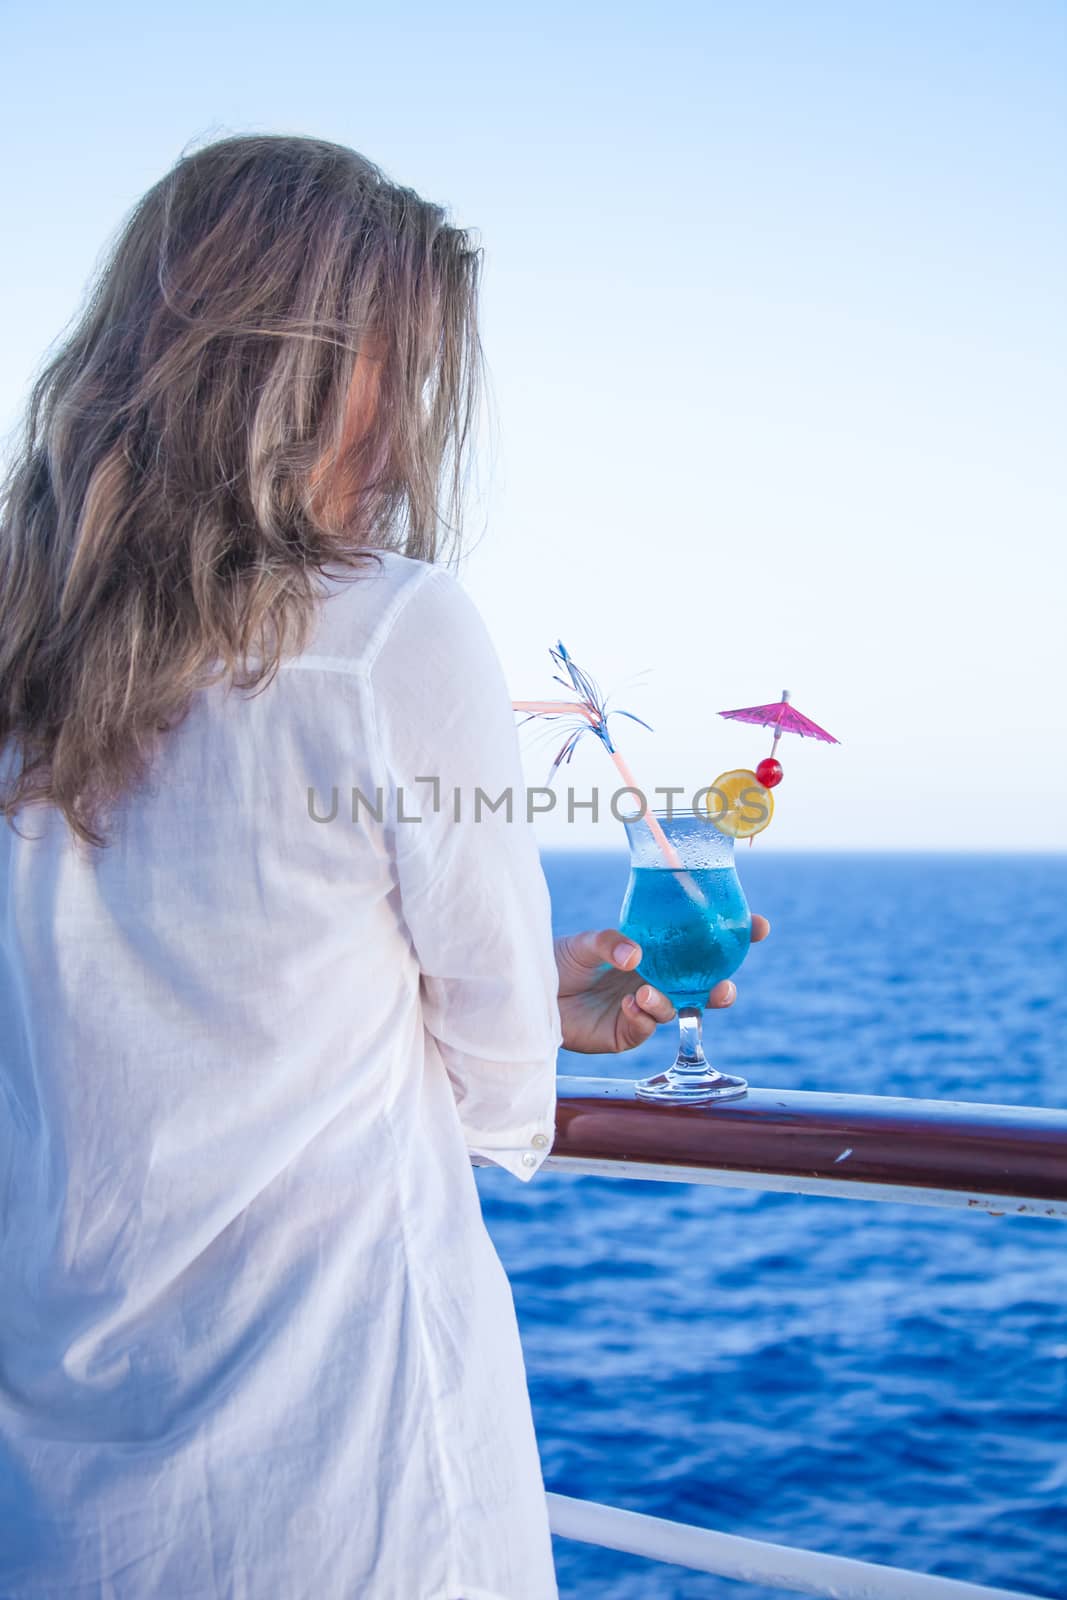 pretty girl with a cold drink, admiring the sea views by MegaArt